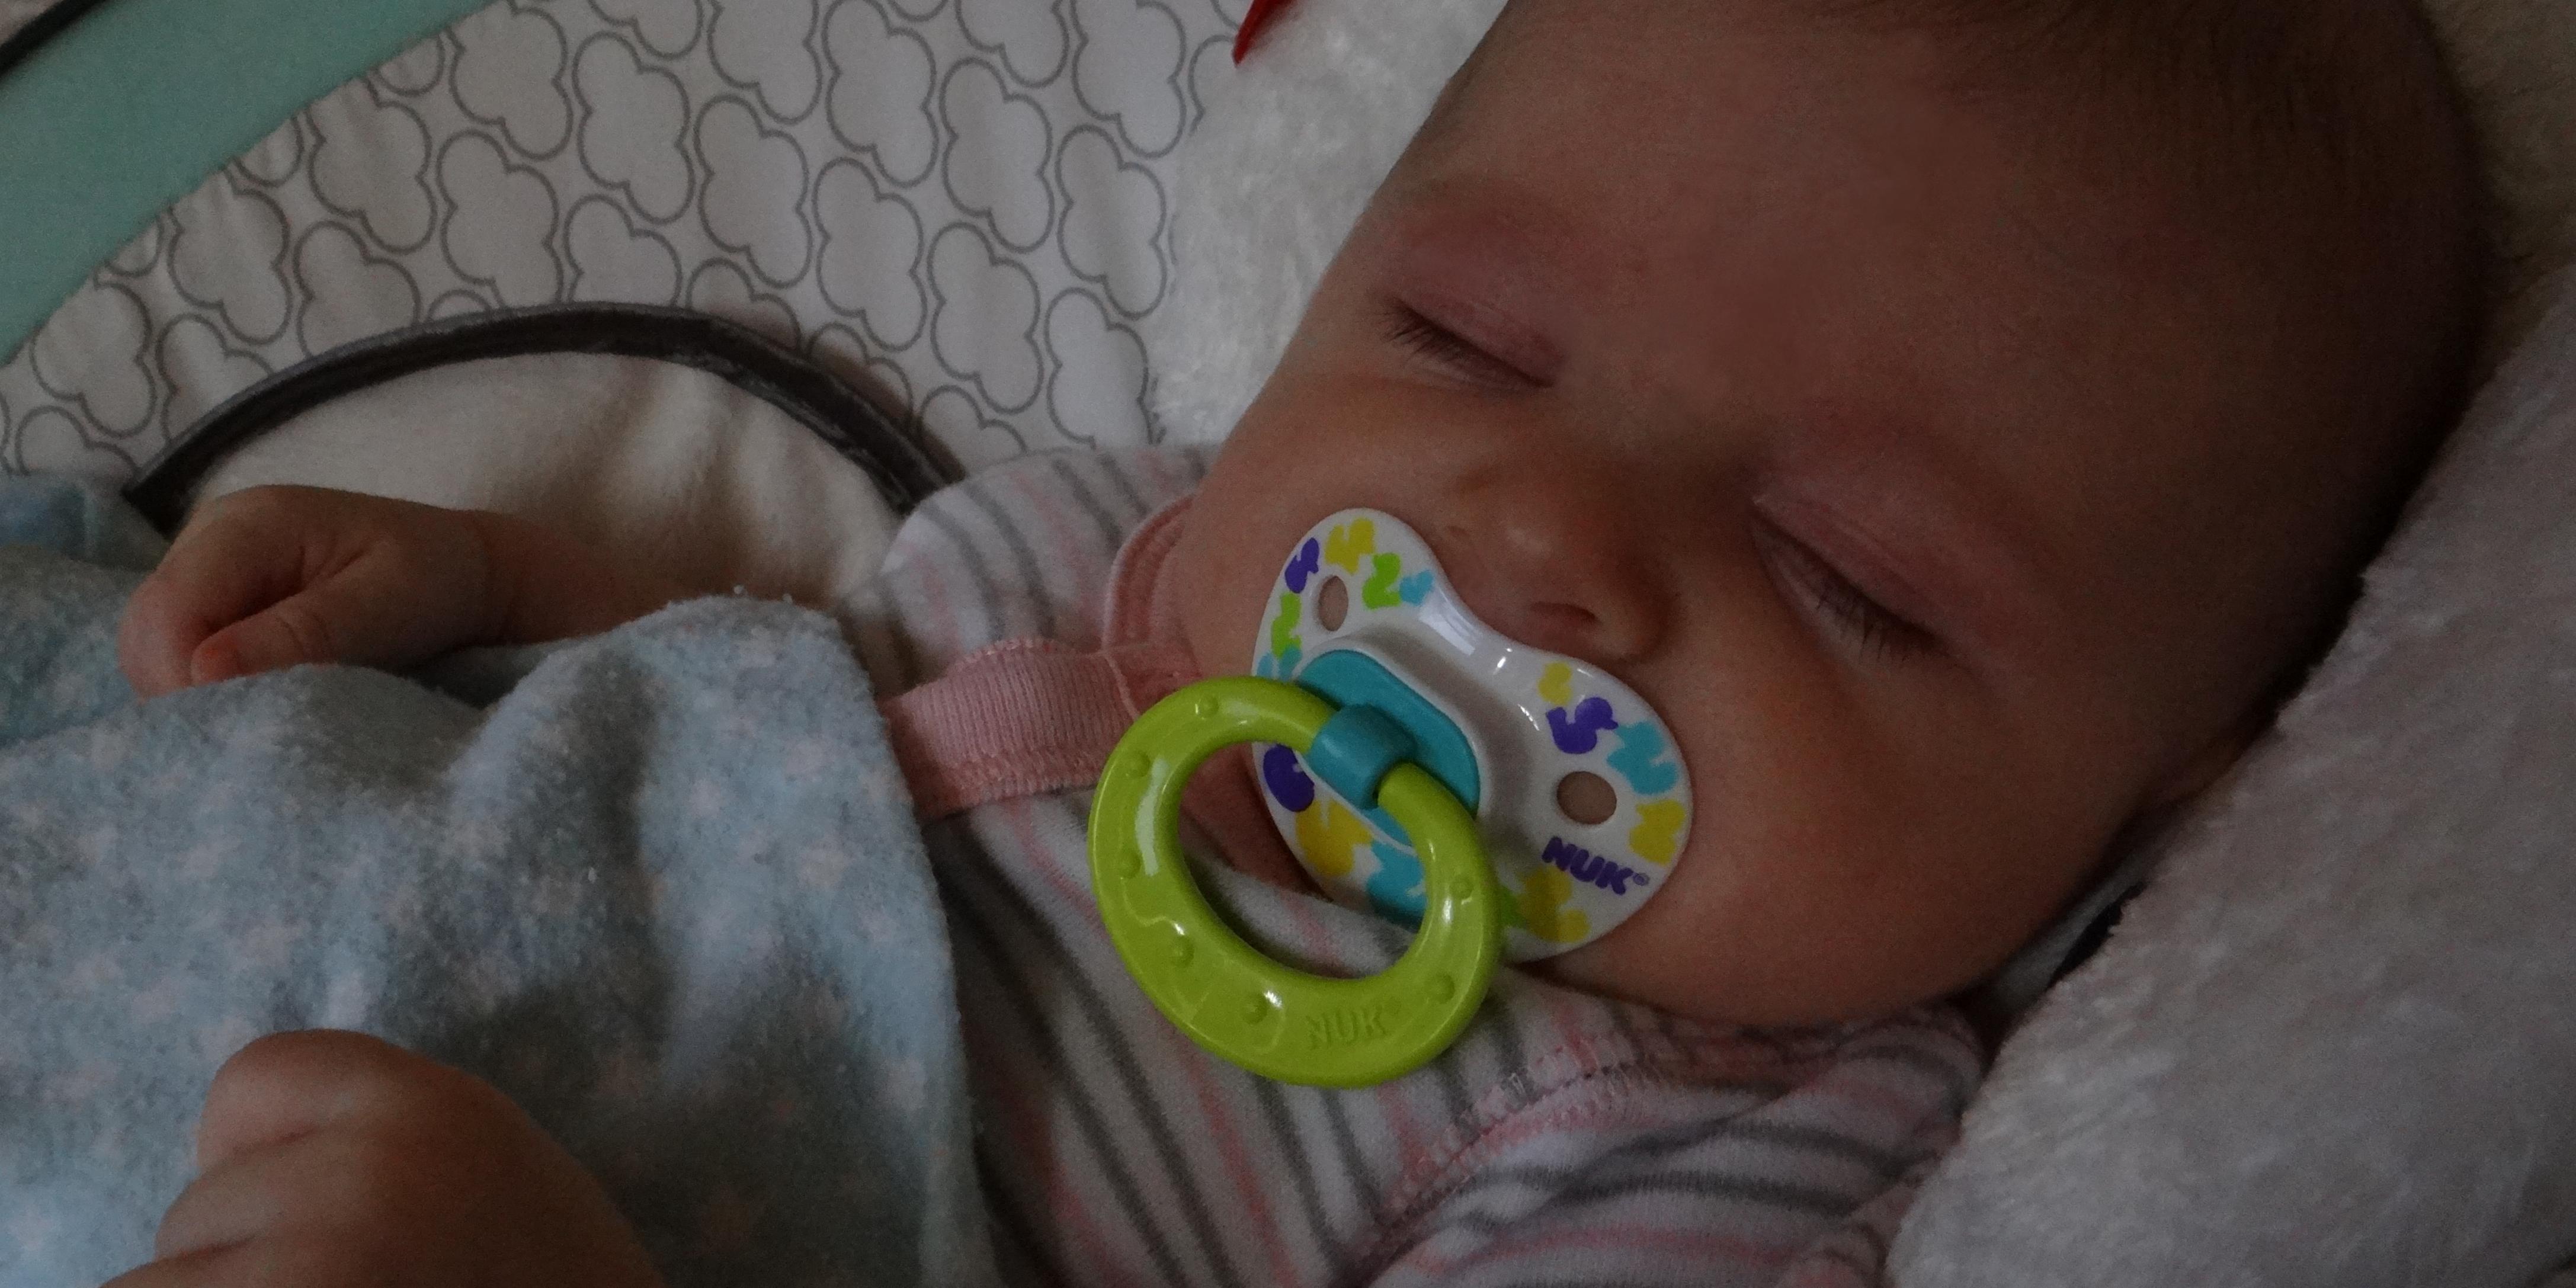 Baby with NUK pacifier